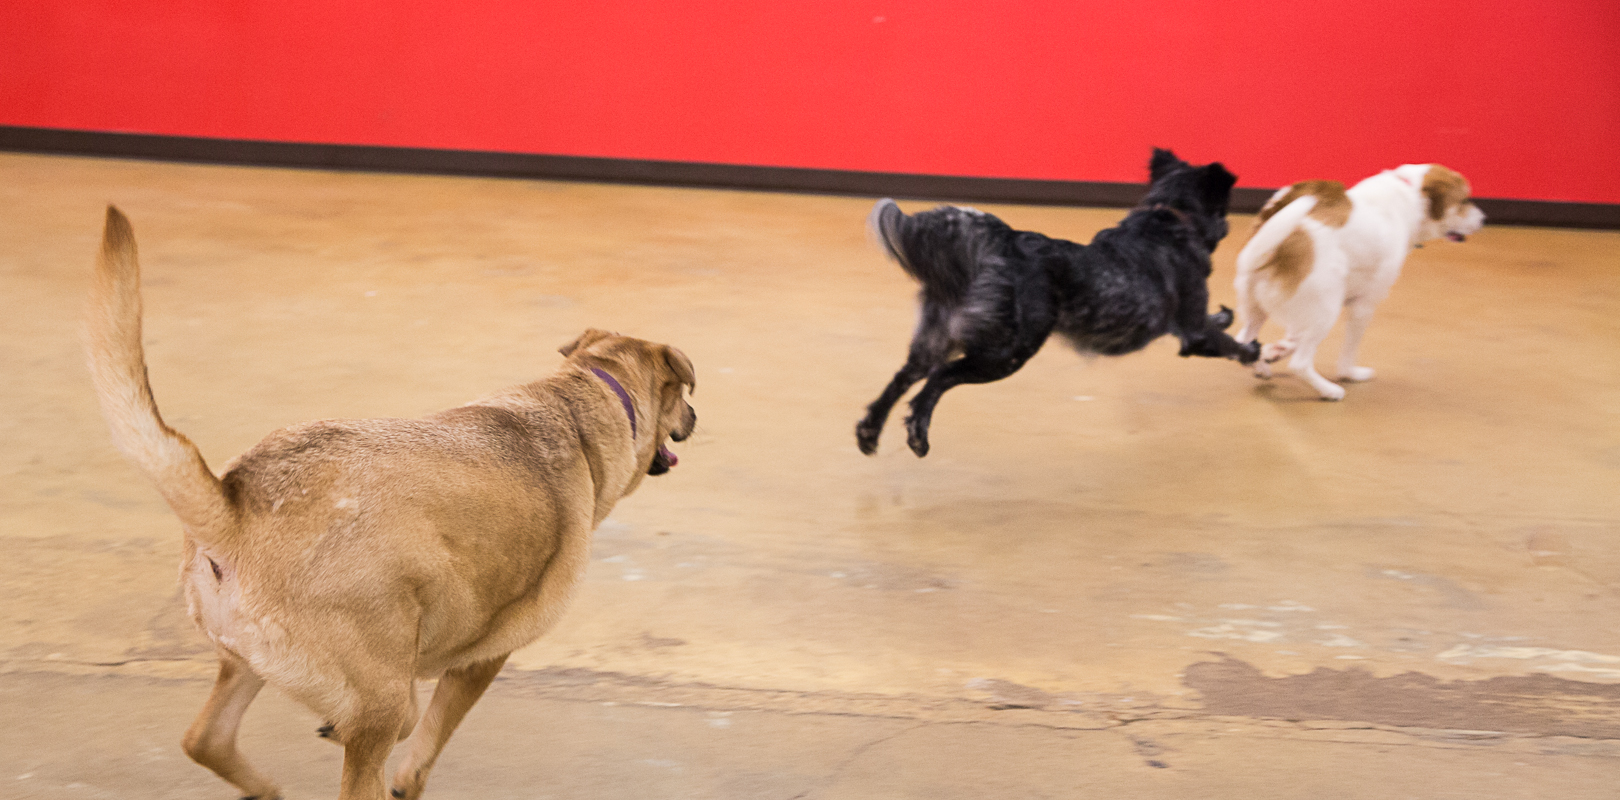   Keep Austin Waggin'!   We're a luxury boarding and doggie daycare located in the coolest city on the map. 